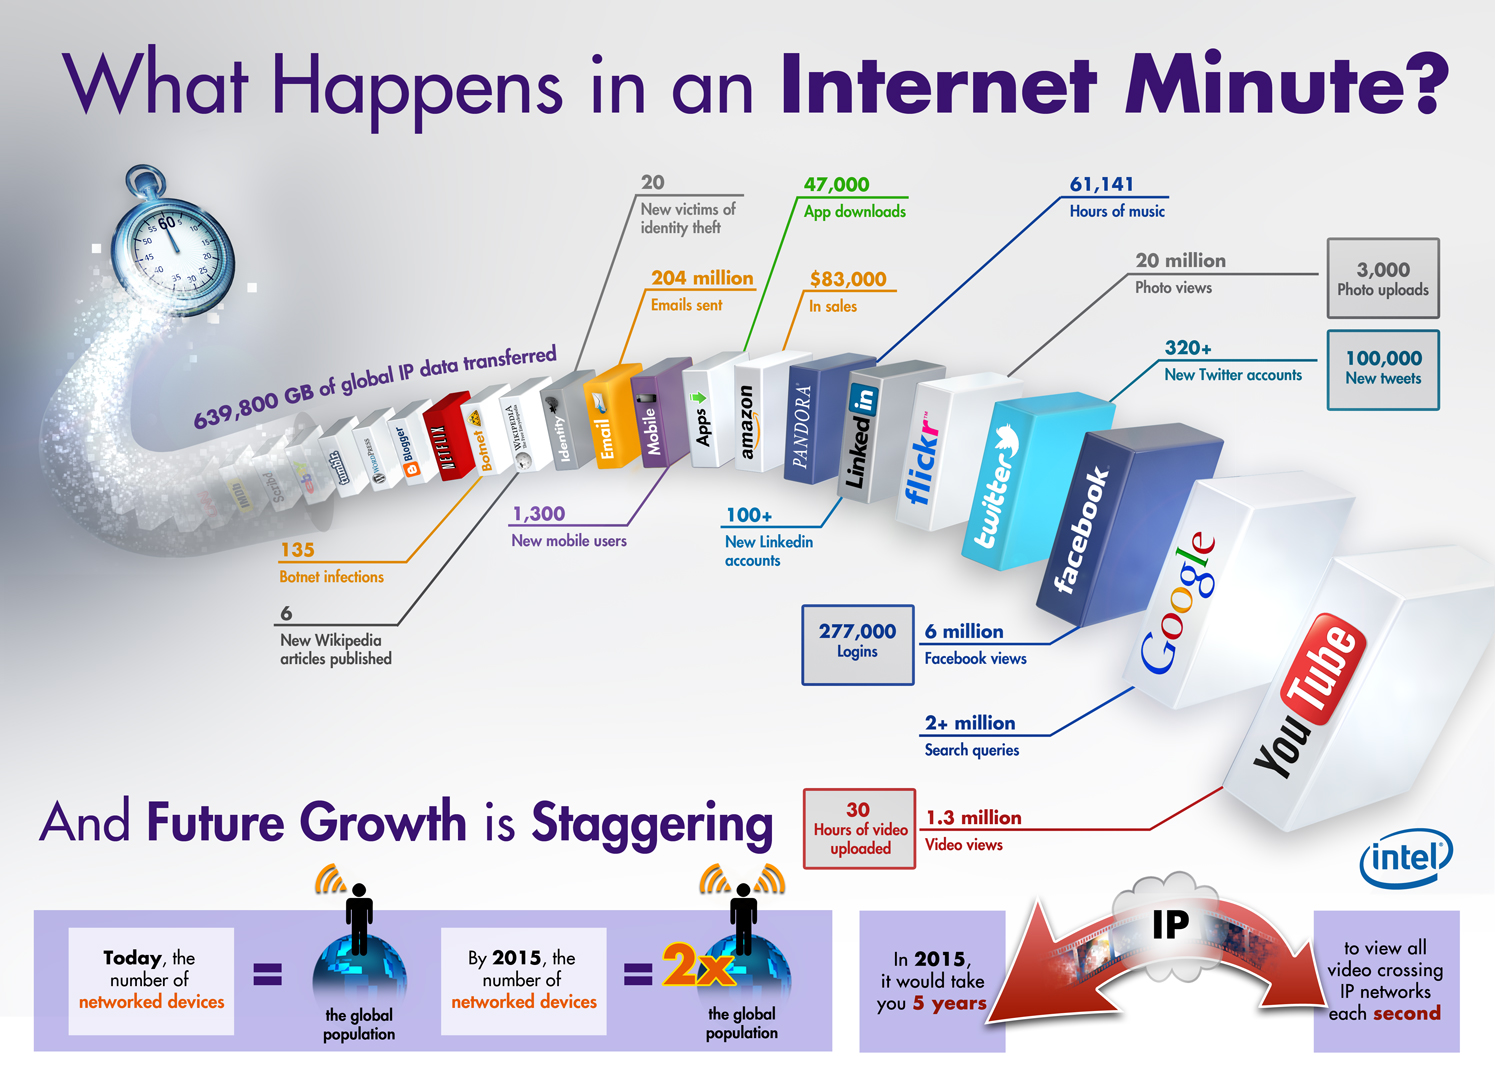 Mixing The New With The Old; How Important Is Digital Advertising? image Internet minute infographic.jpg